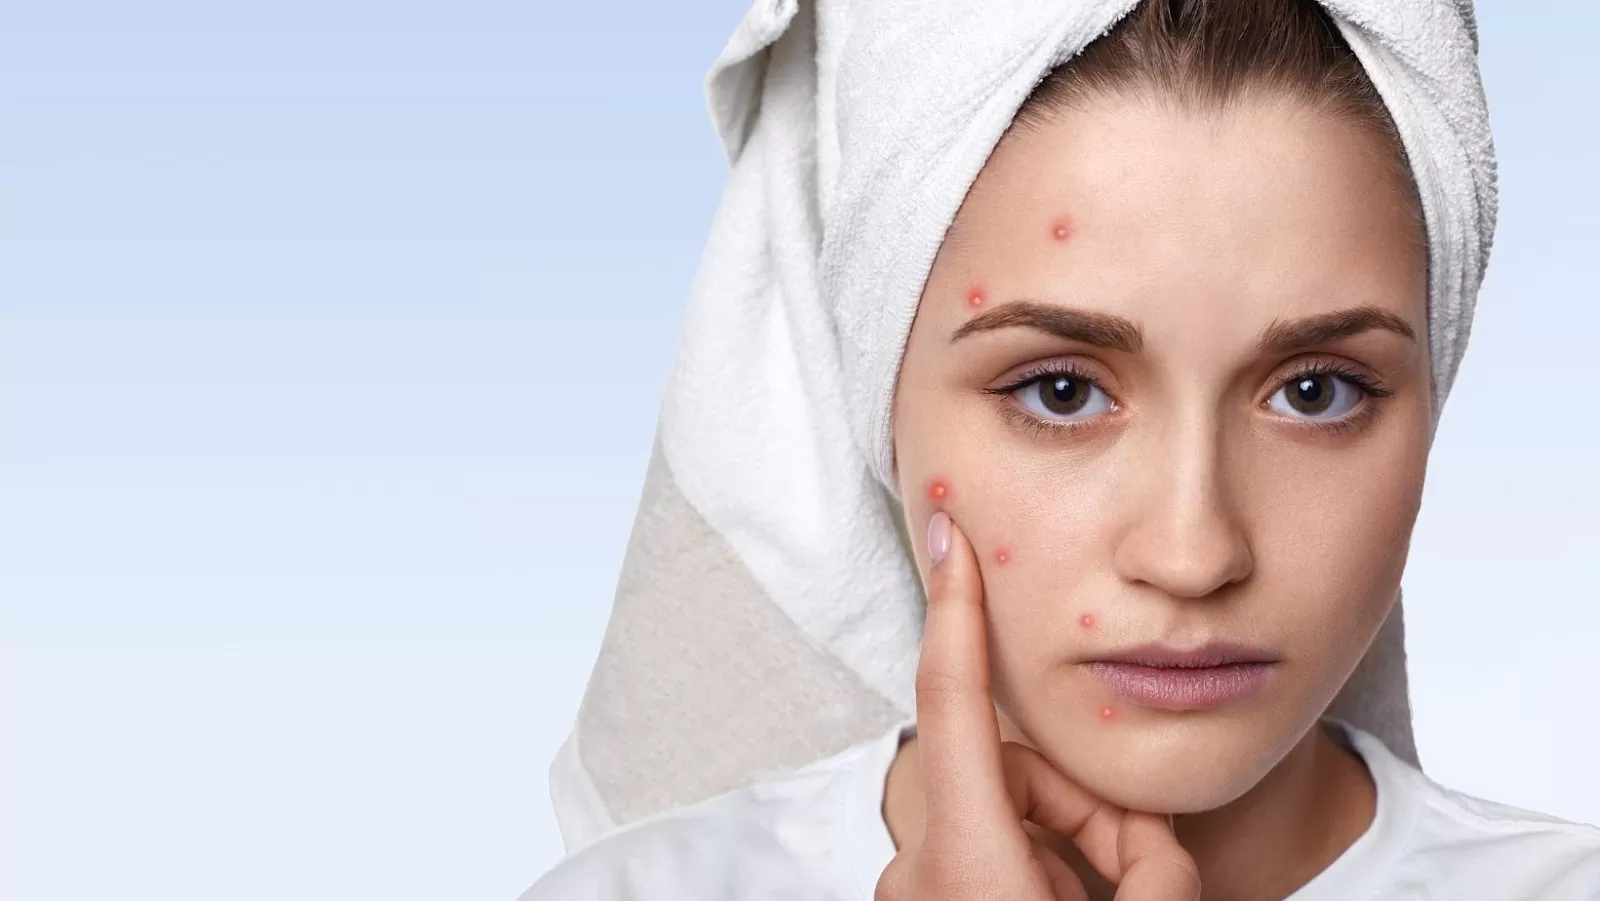 All you need to know about acne